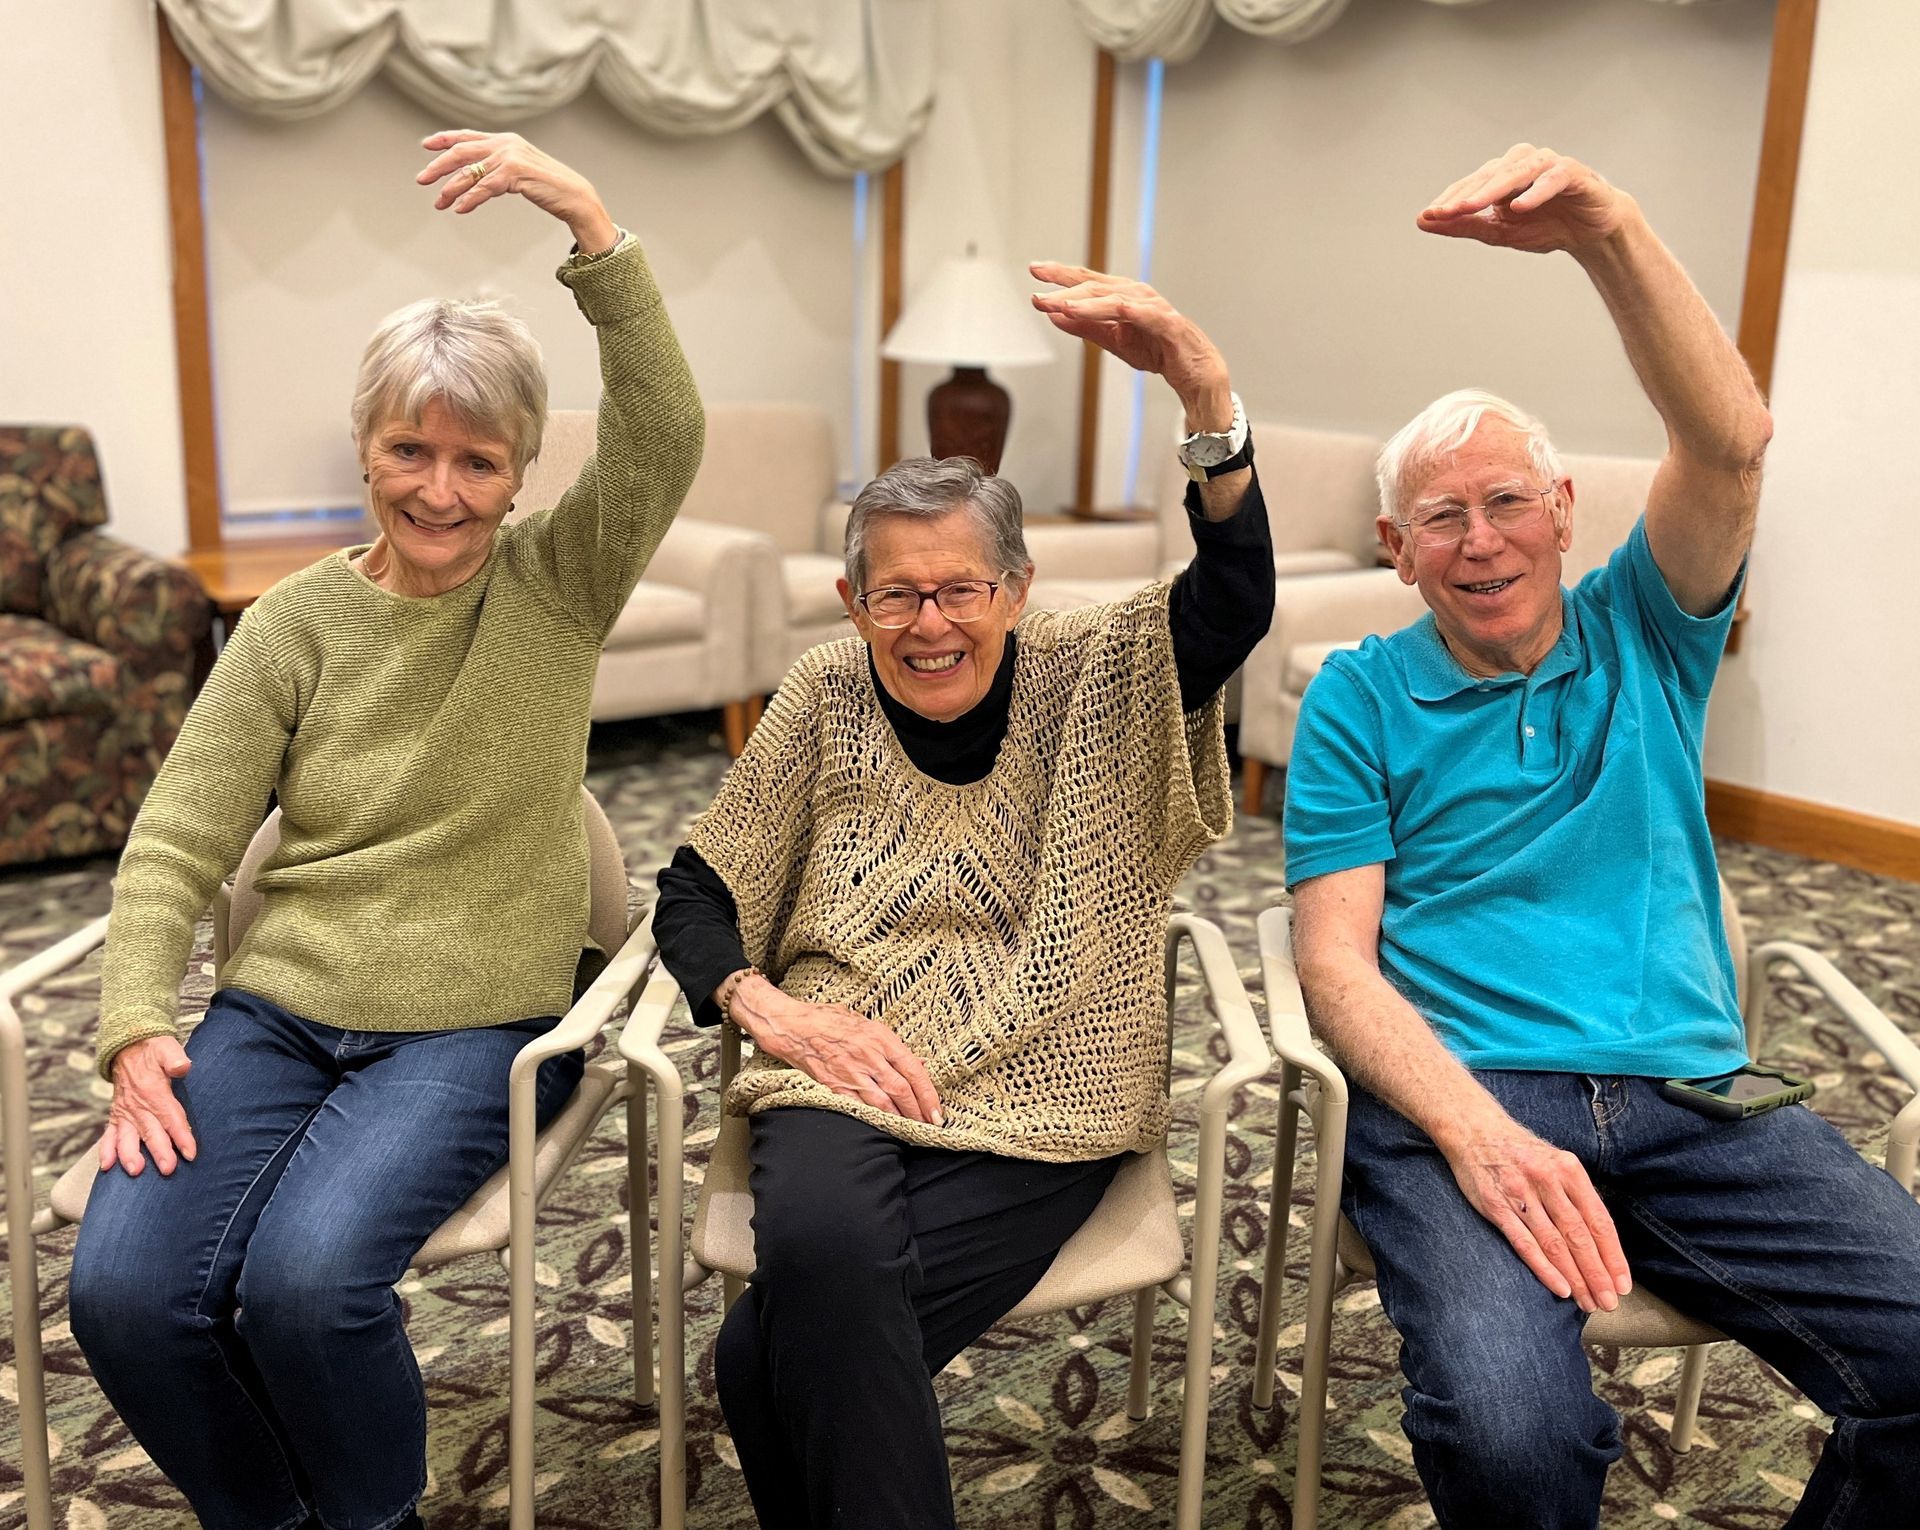 Residents enjoy various fitness opportunities at Chestnut Square in Glenview, IL